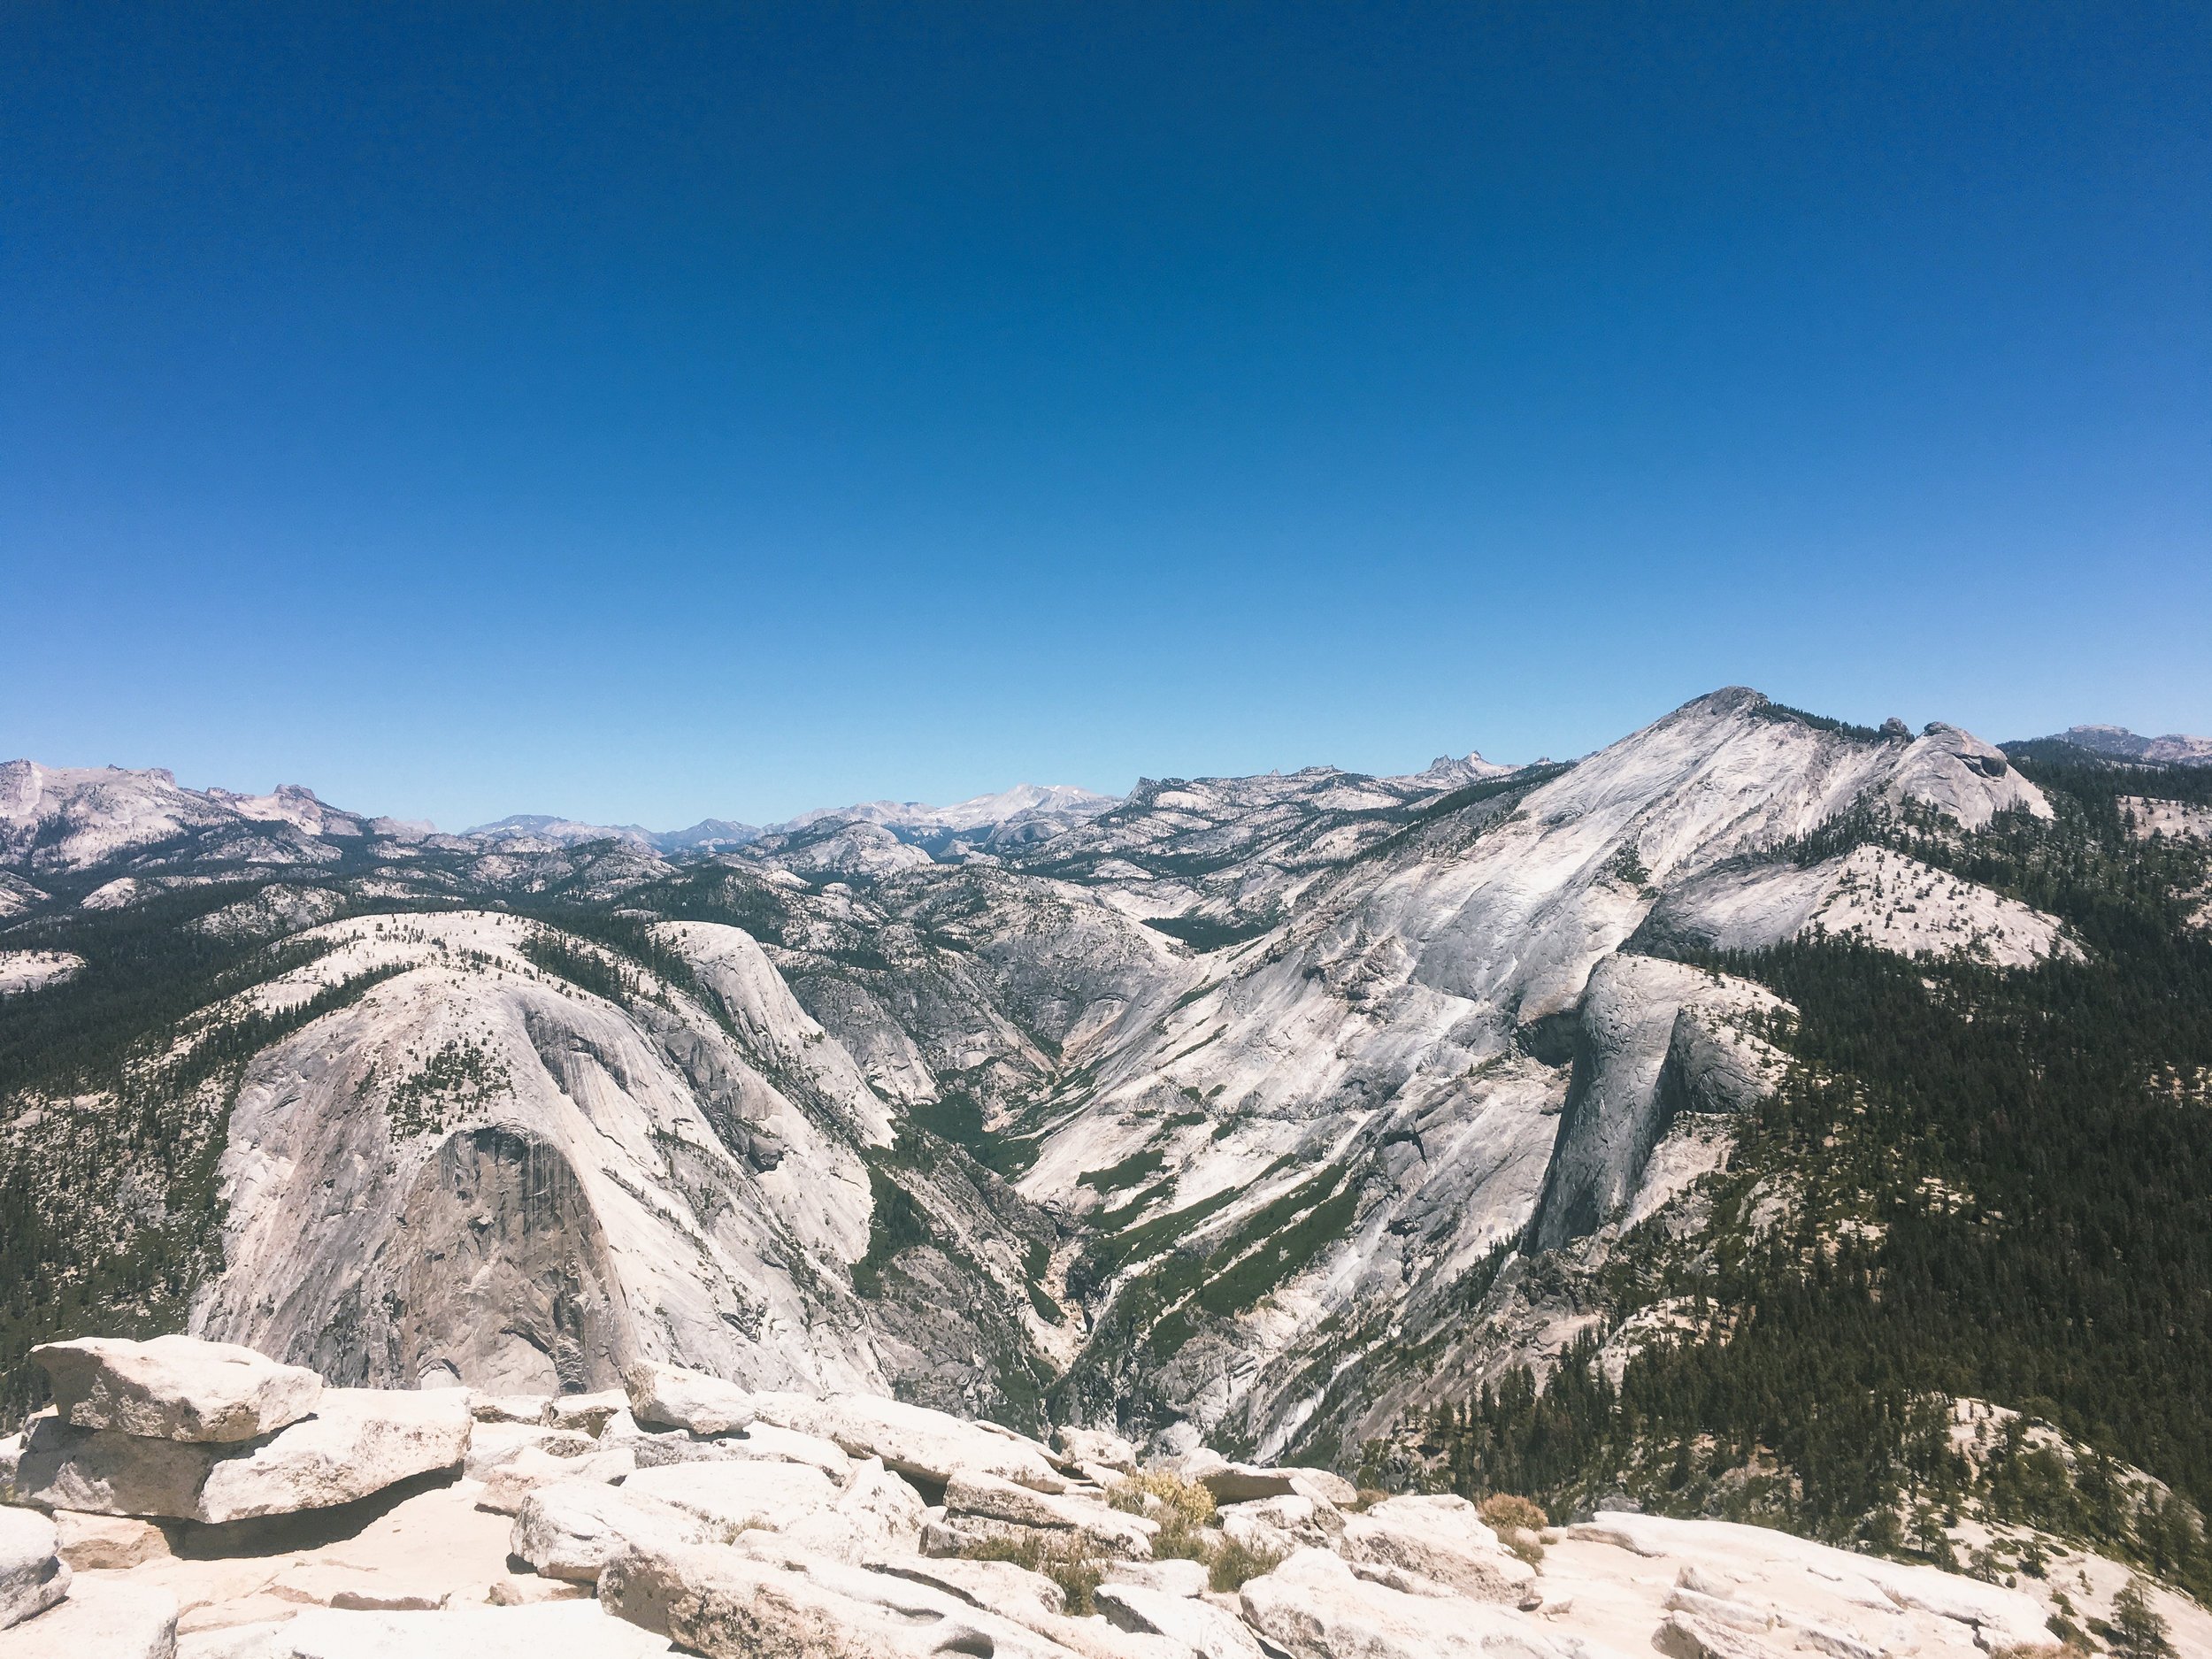  Tenaya Canyon from the top of Half Dome 